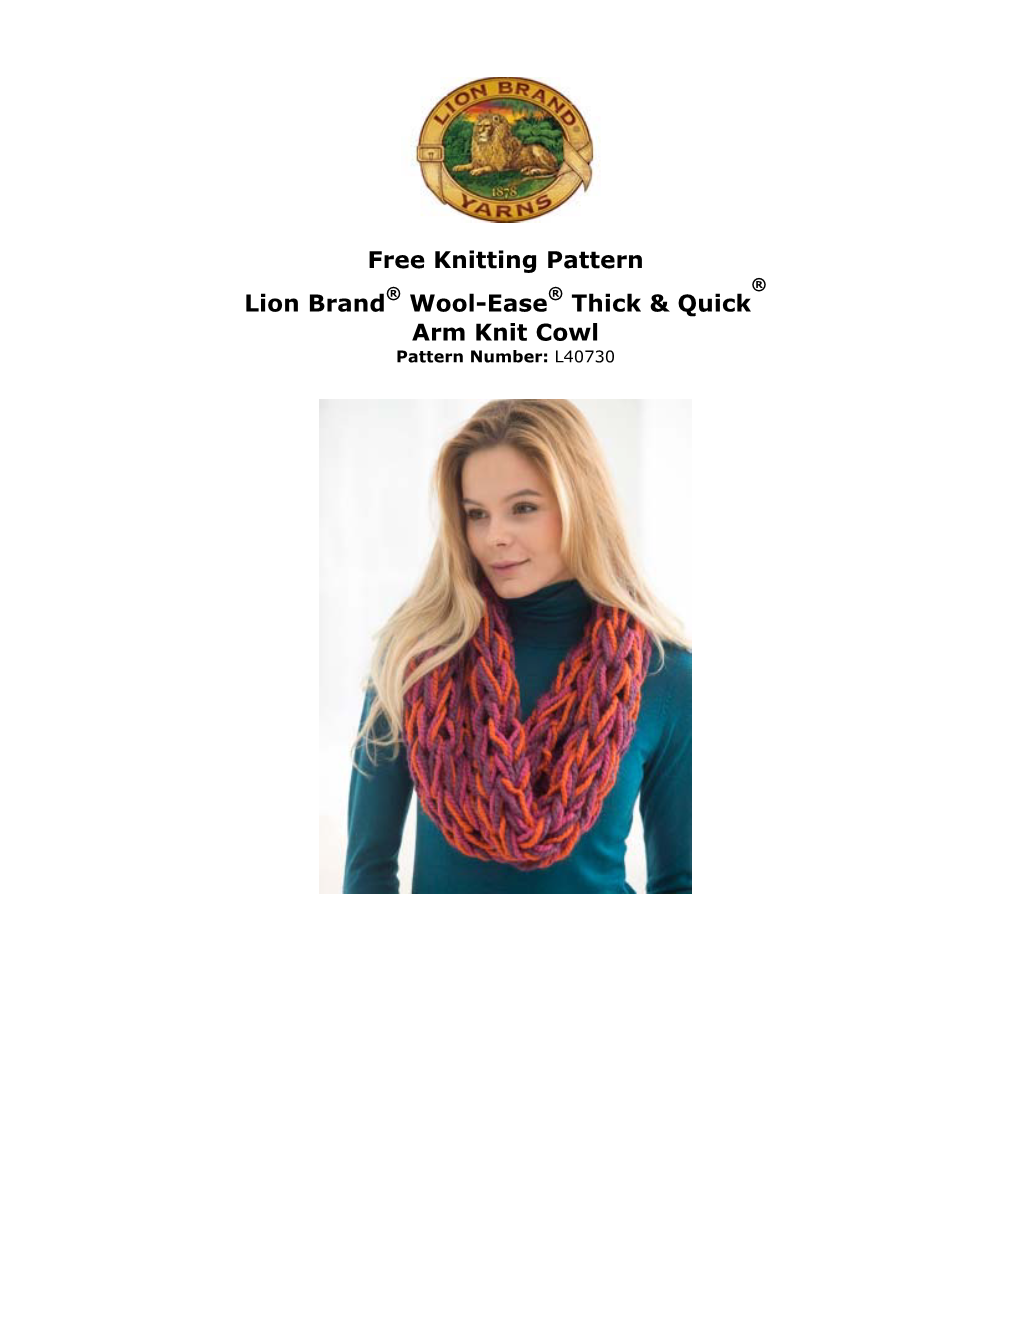 Free Knitting Pattern: Wool-Ease® Thick & Quick® Arm Knit Cowl